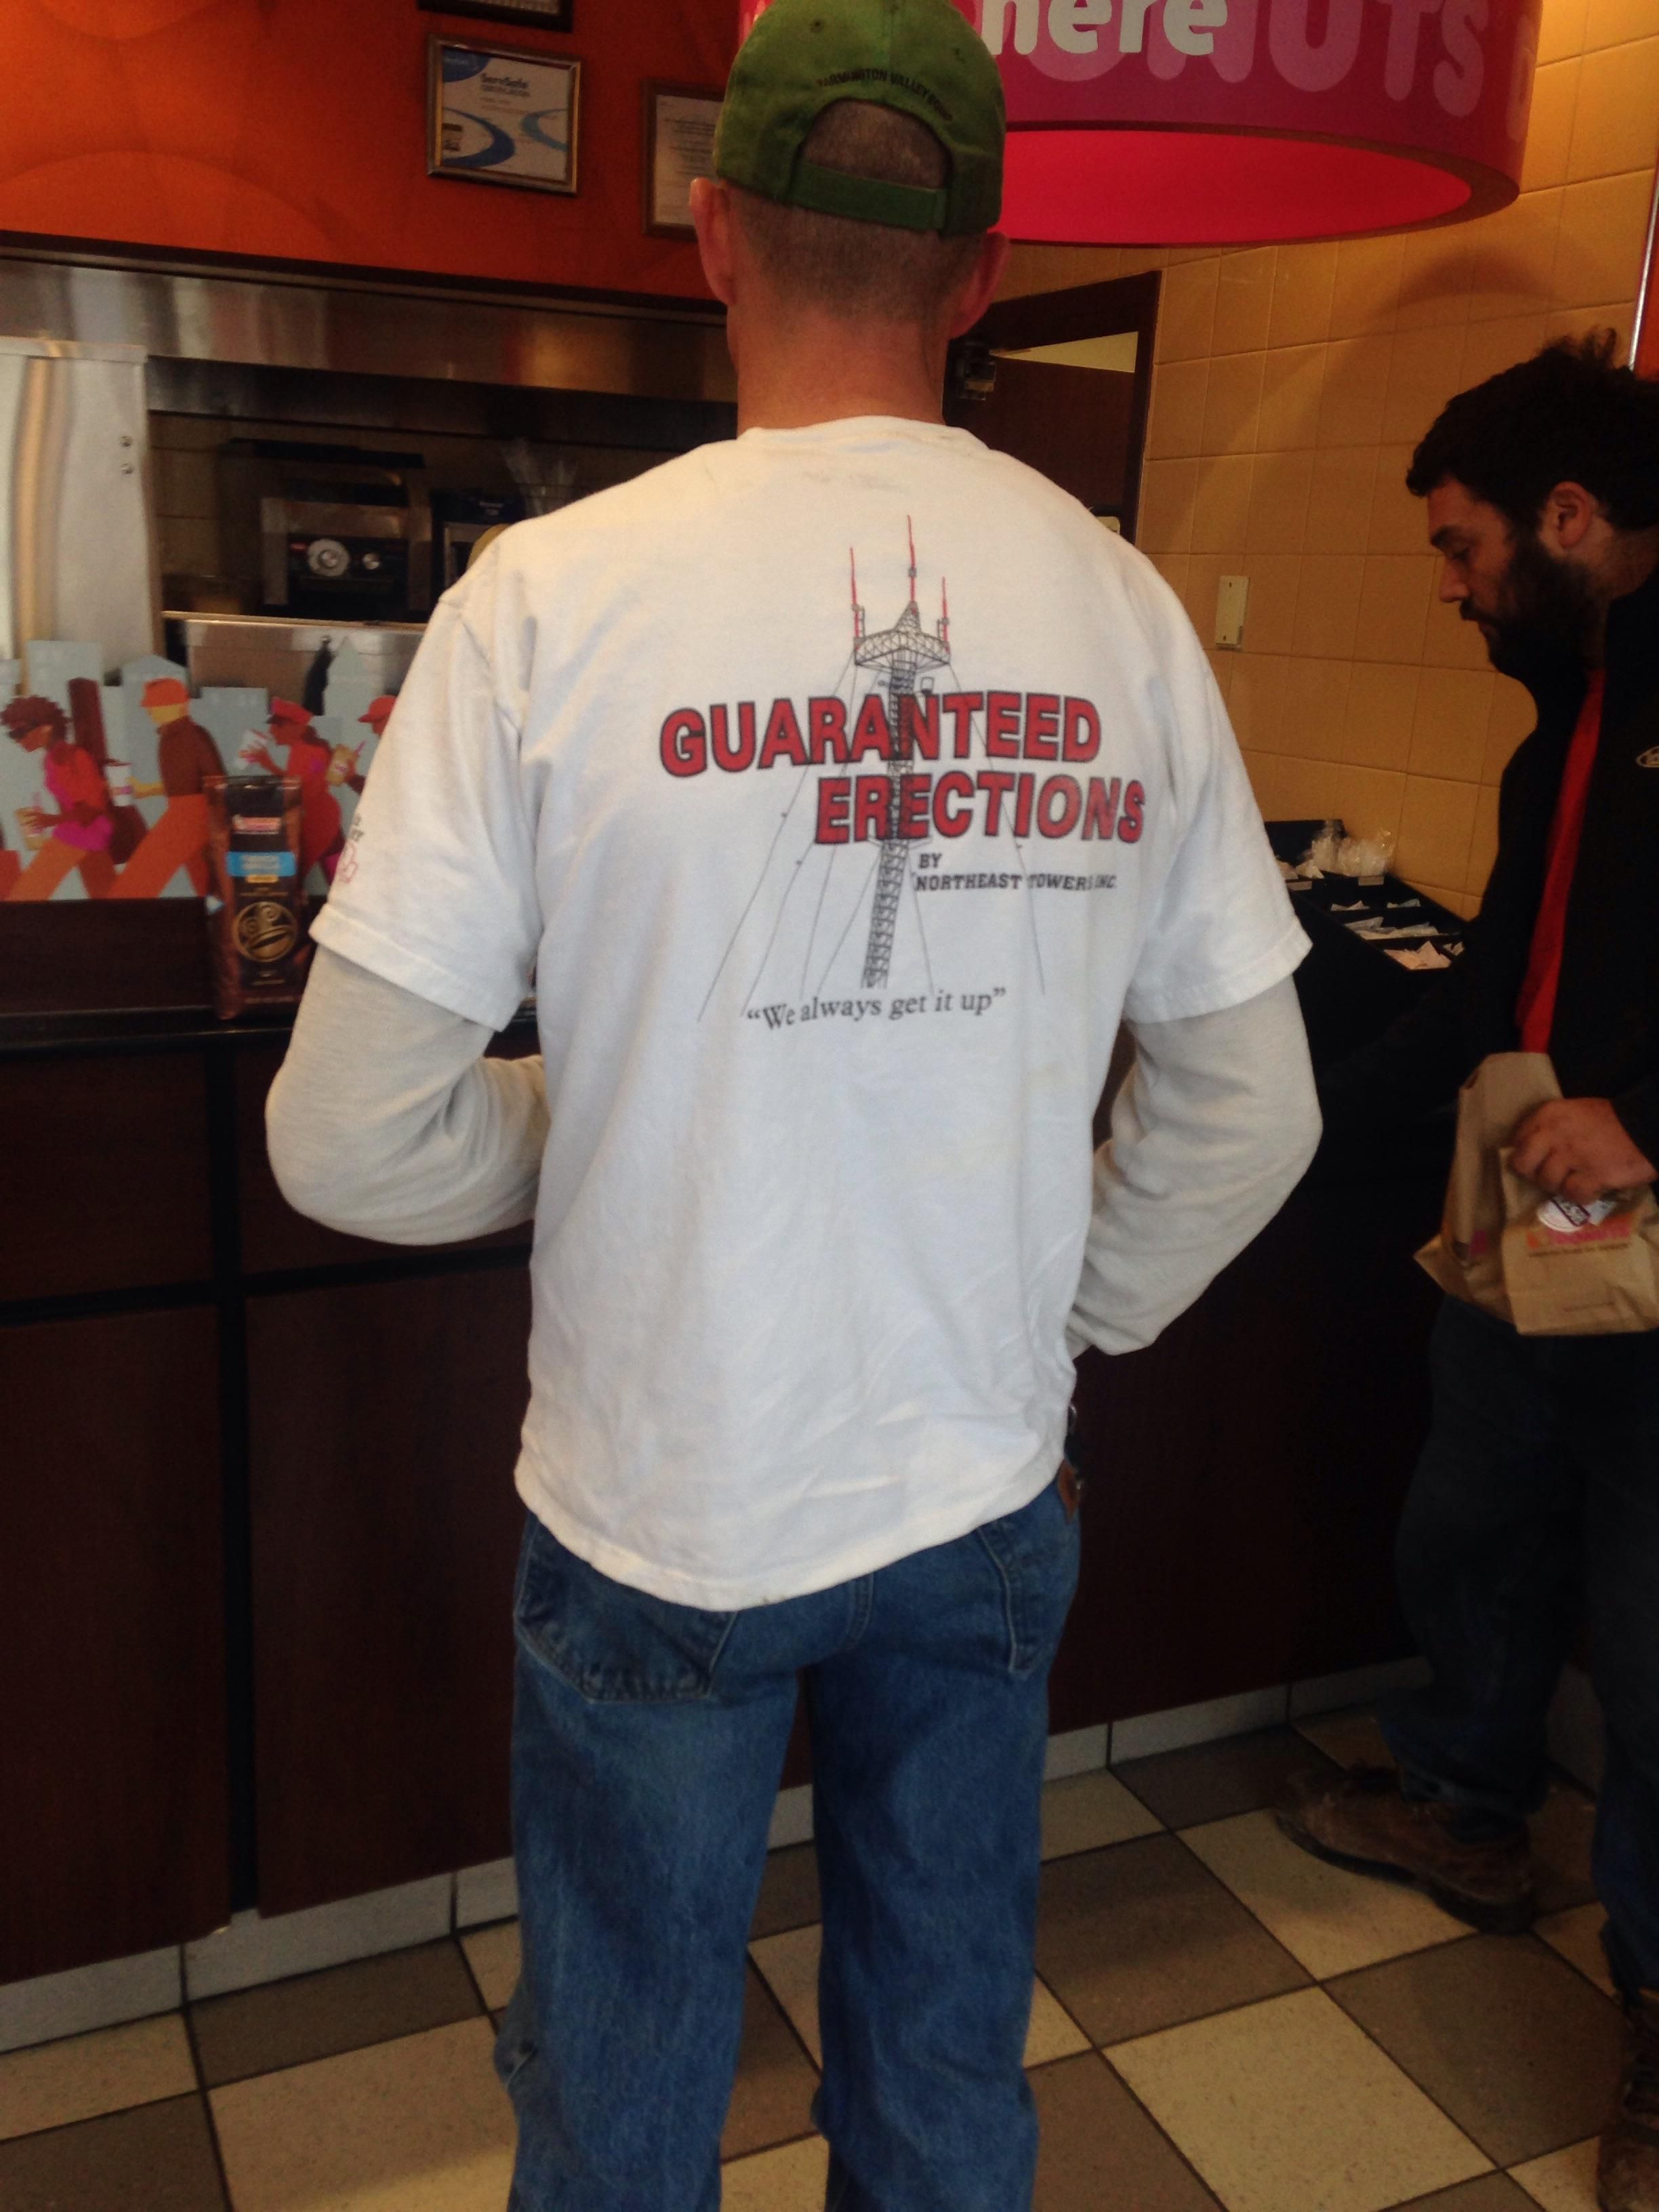 Spotted at a Dunkin Donuts. Yes, it's real.